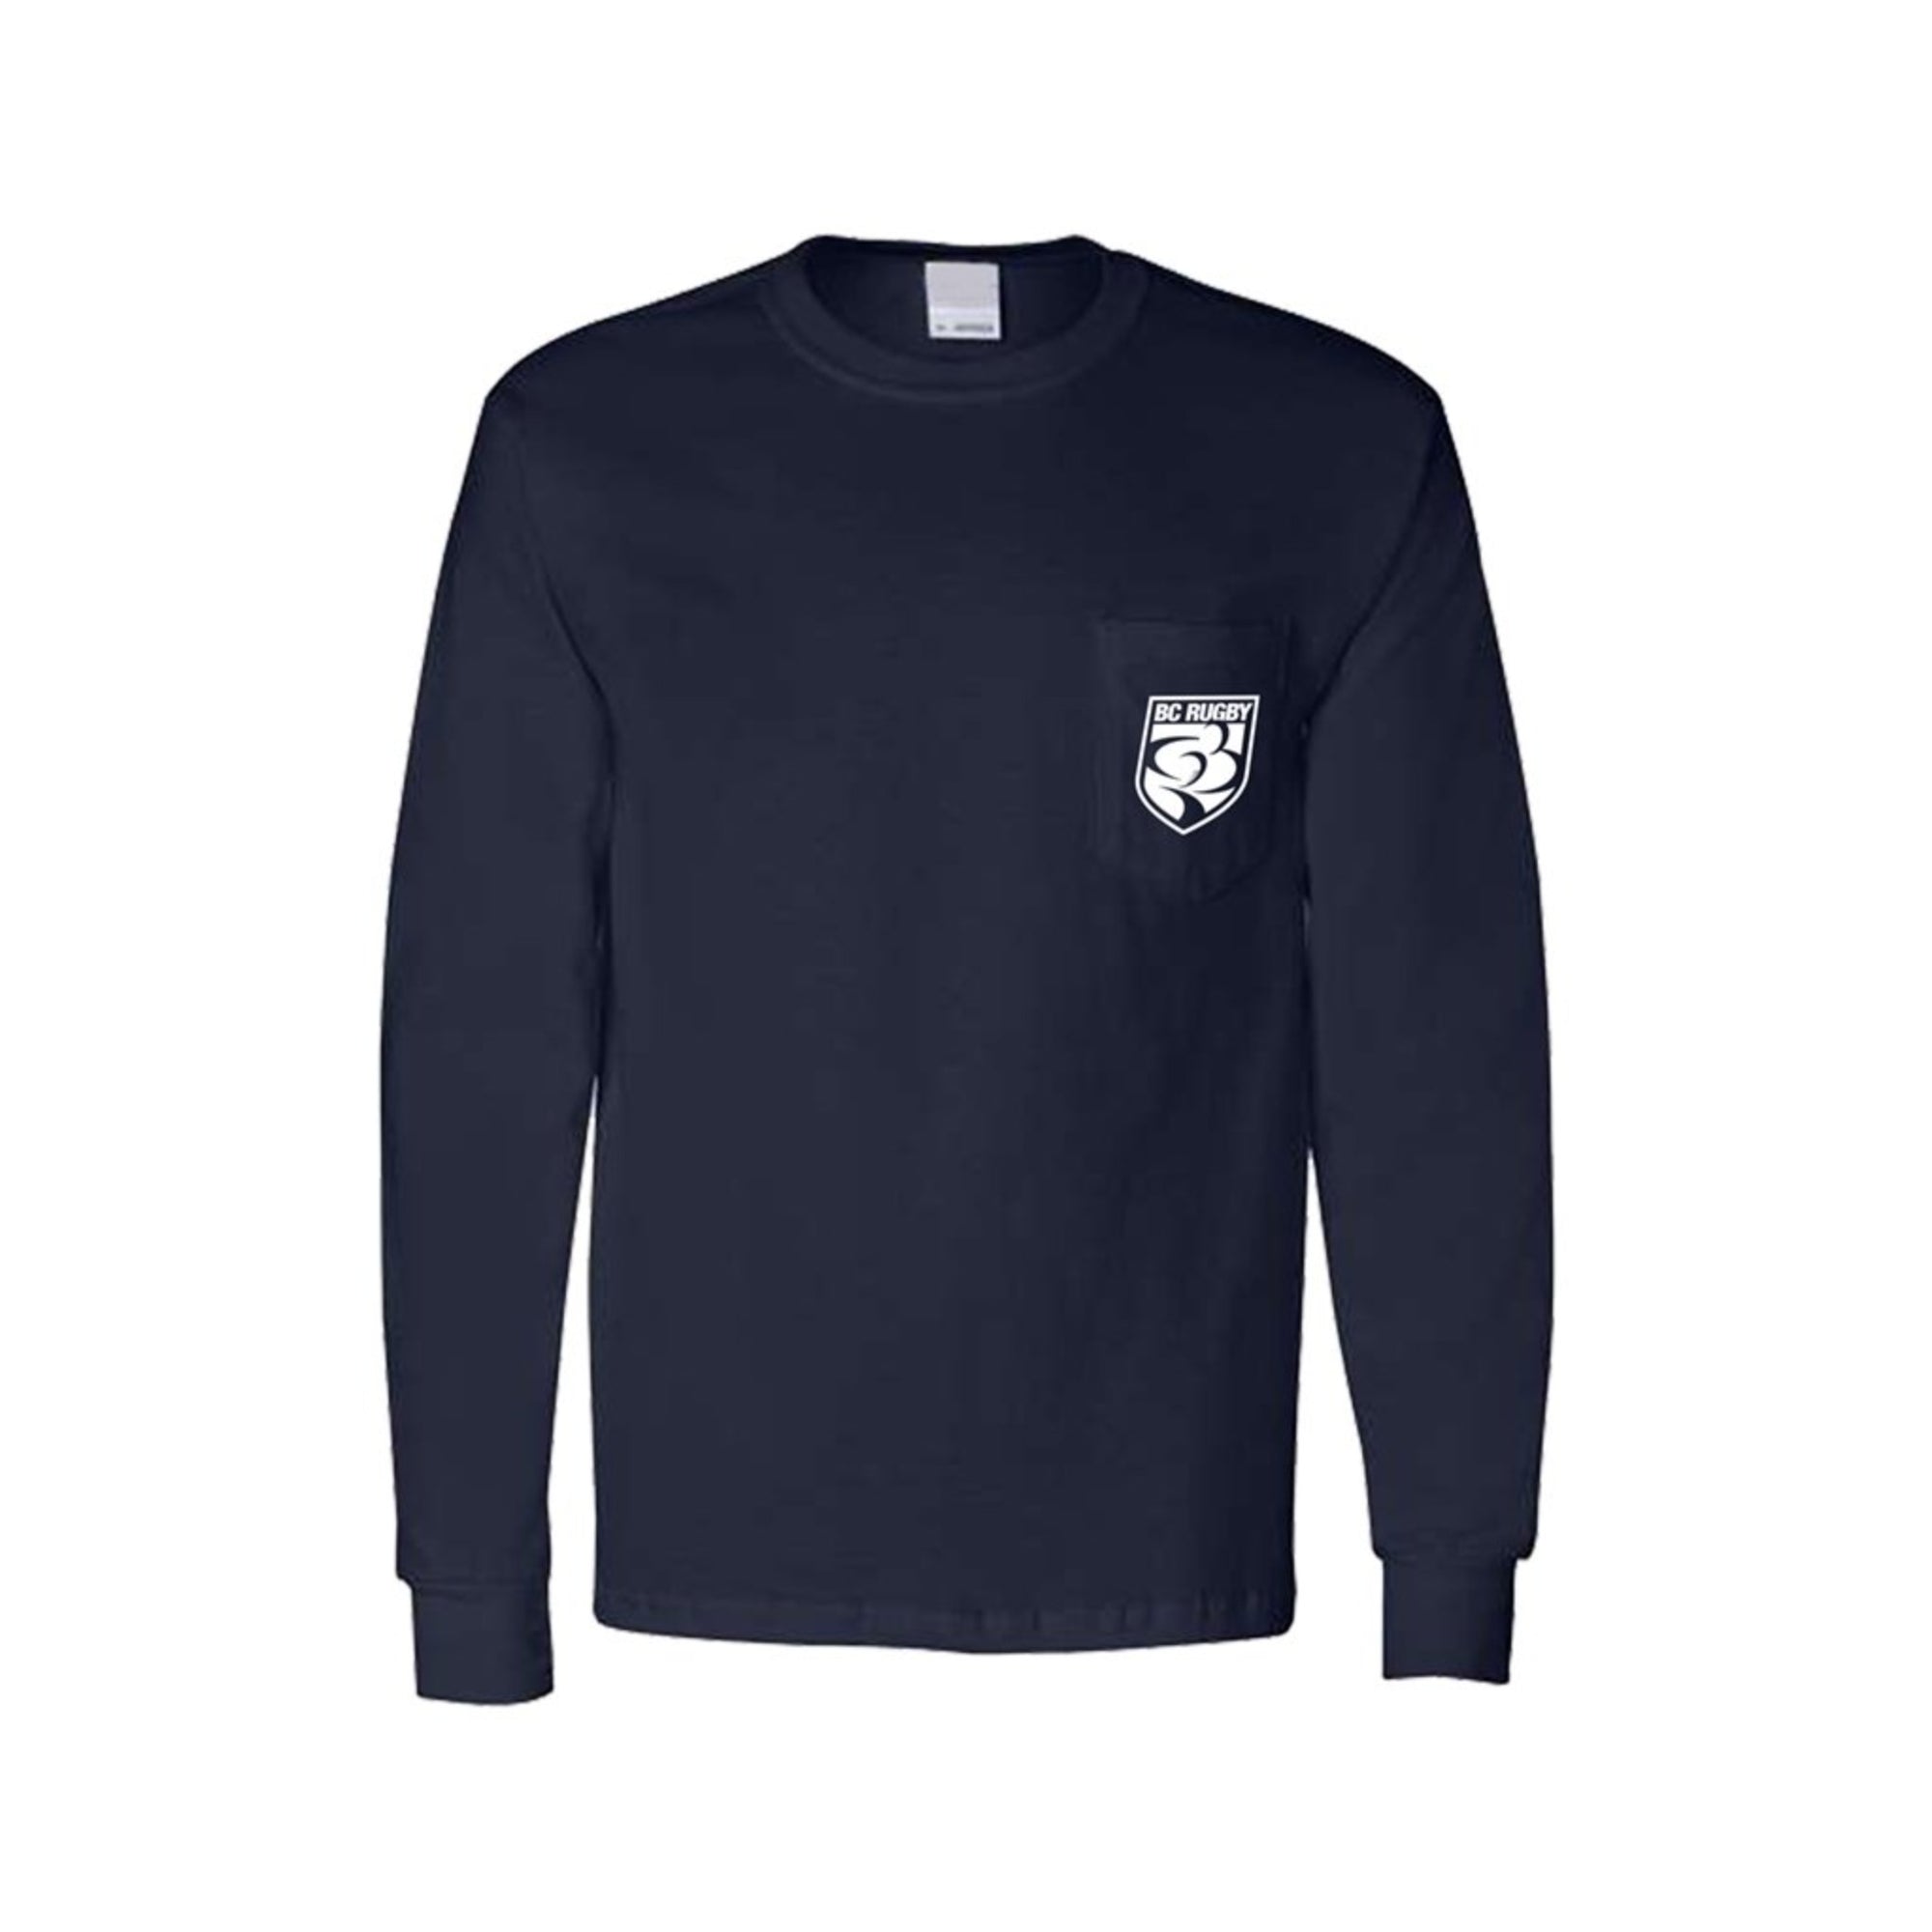 BC Rugby 2022 Long Sleeve Tee - www.therugbyshop.com www.therugbyshop.com UNISEX / NAVY W/ SHIELD / S XIX Brands HOODIES BC Rugby 2022 Long Sleeve Tee